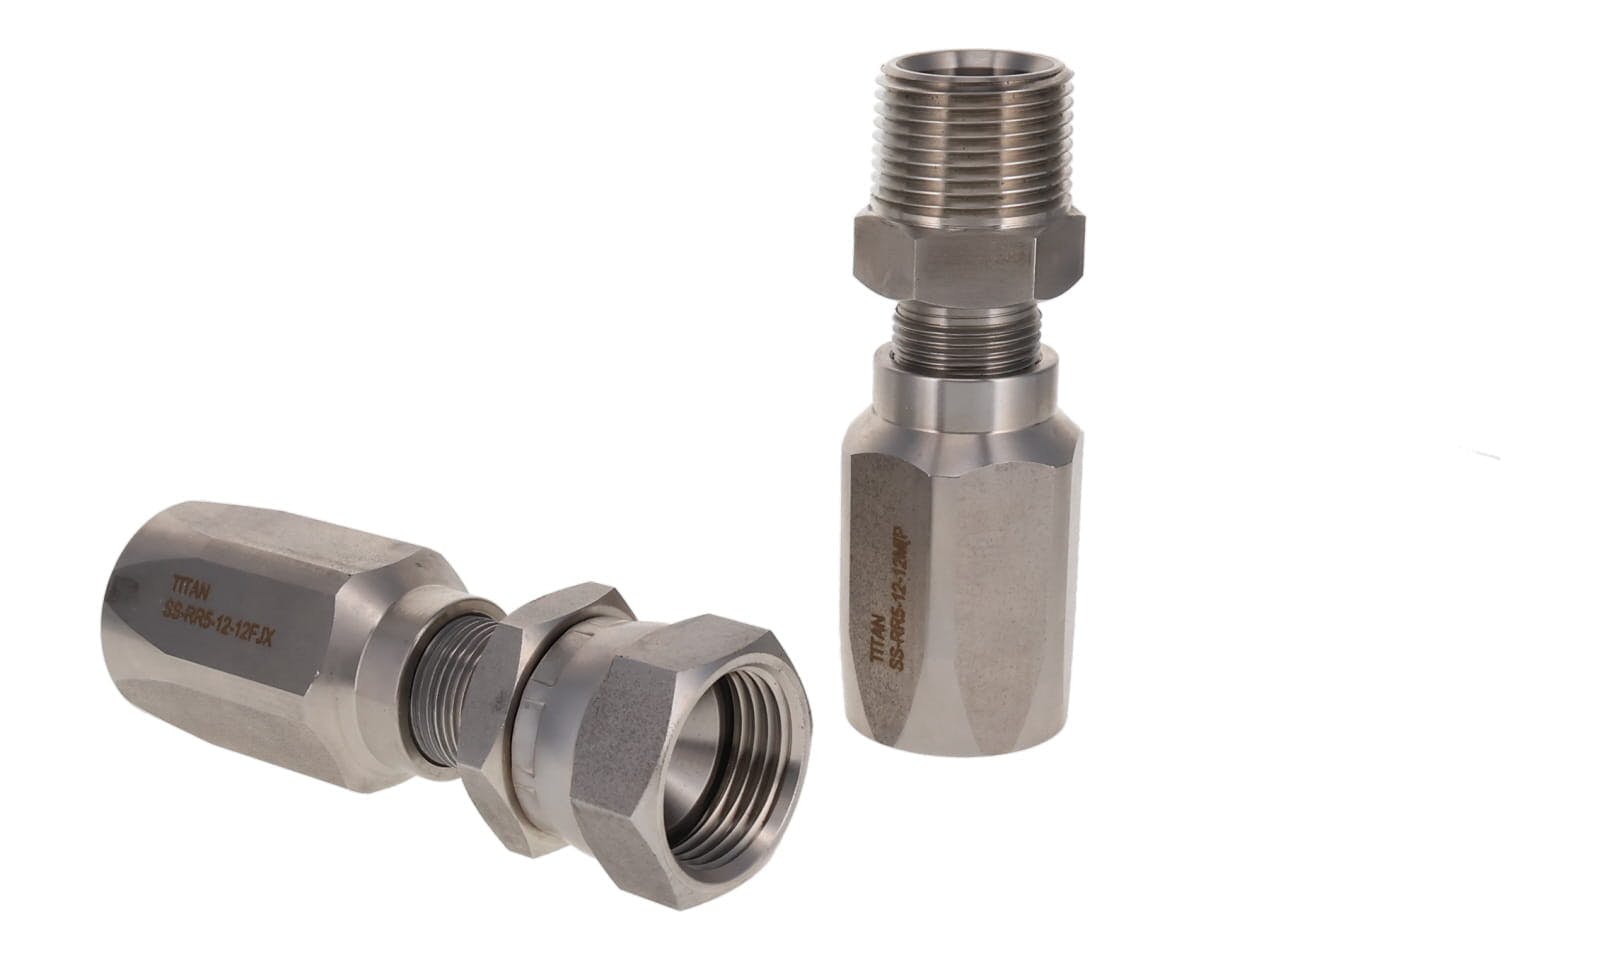 R5 ReUsable Hose Fittings- Stainless